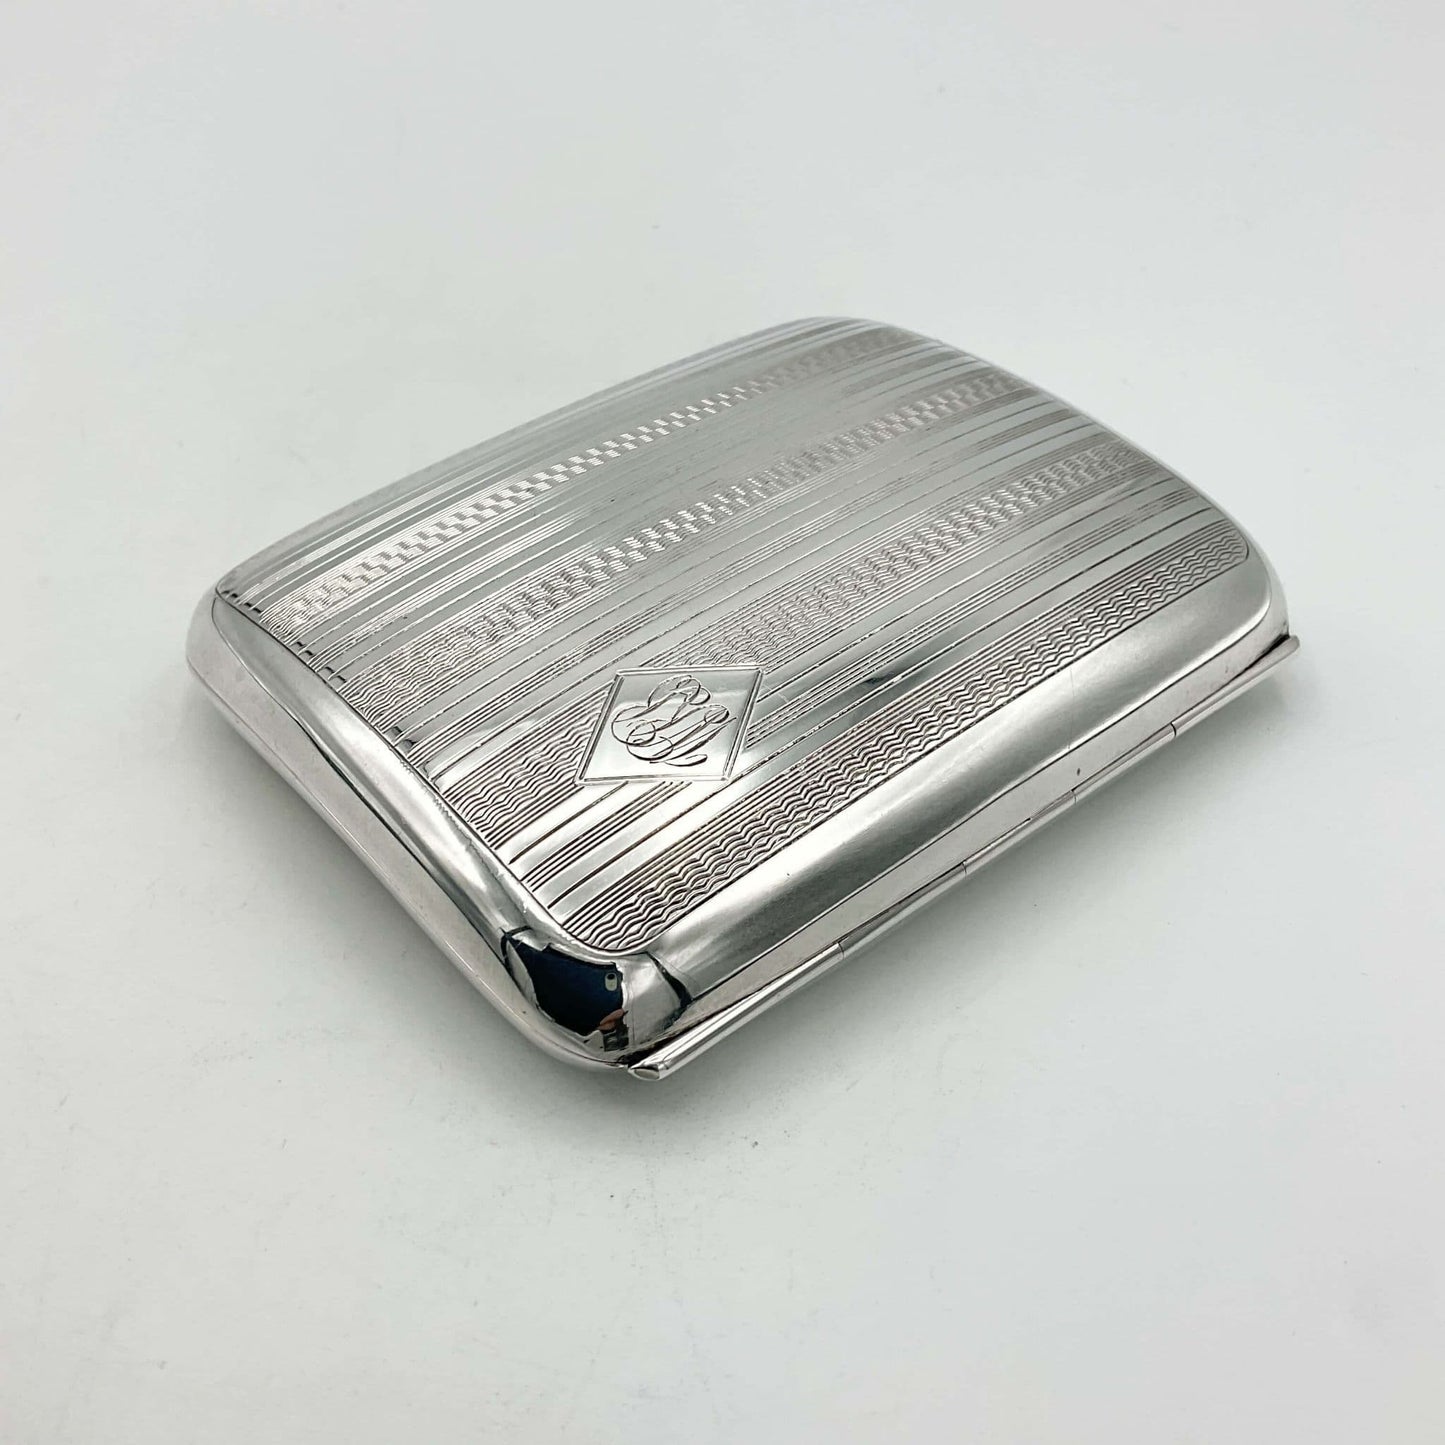 Antique 1920s silver cigarette case viewed from the hinge on a white background